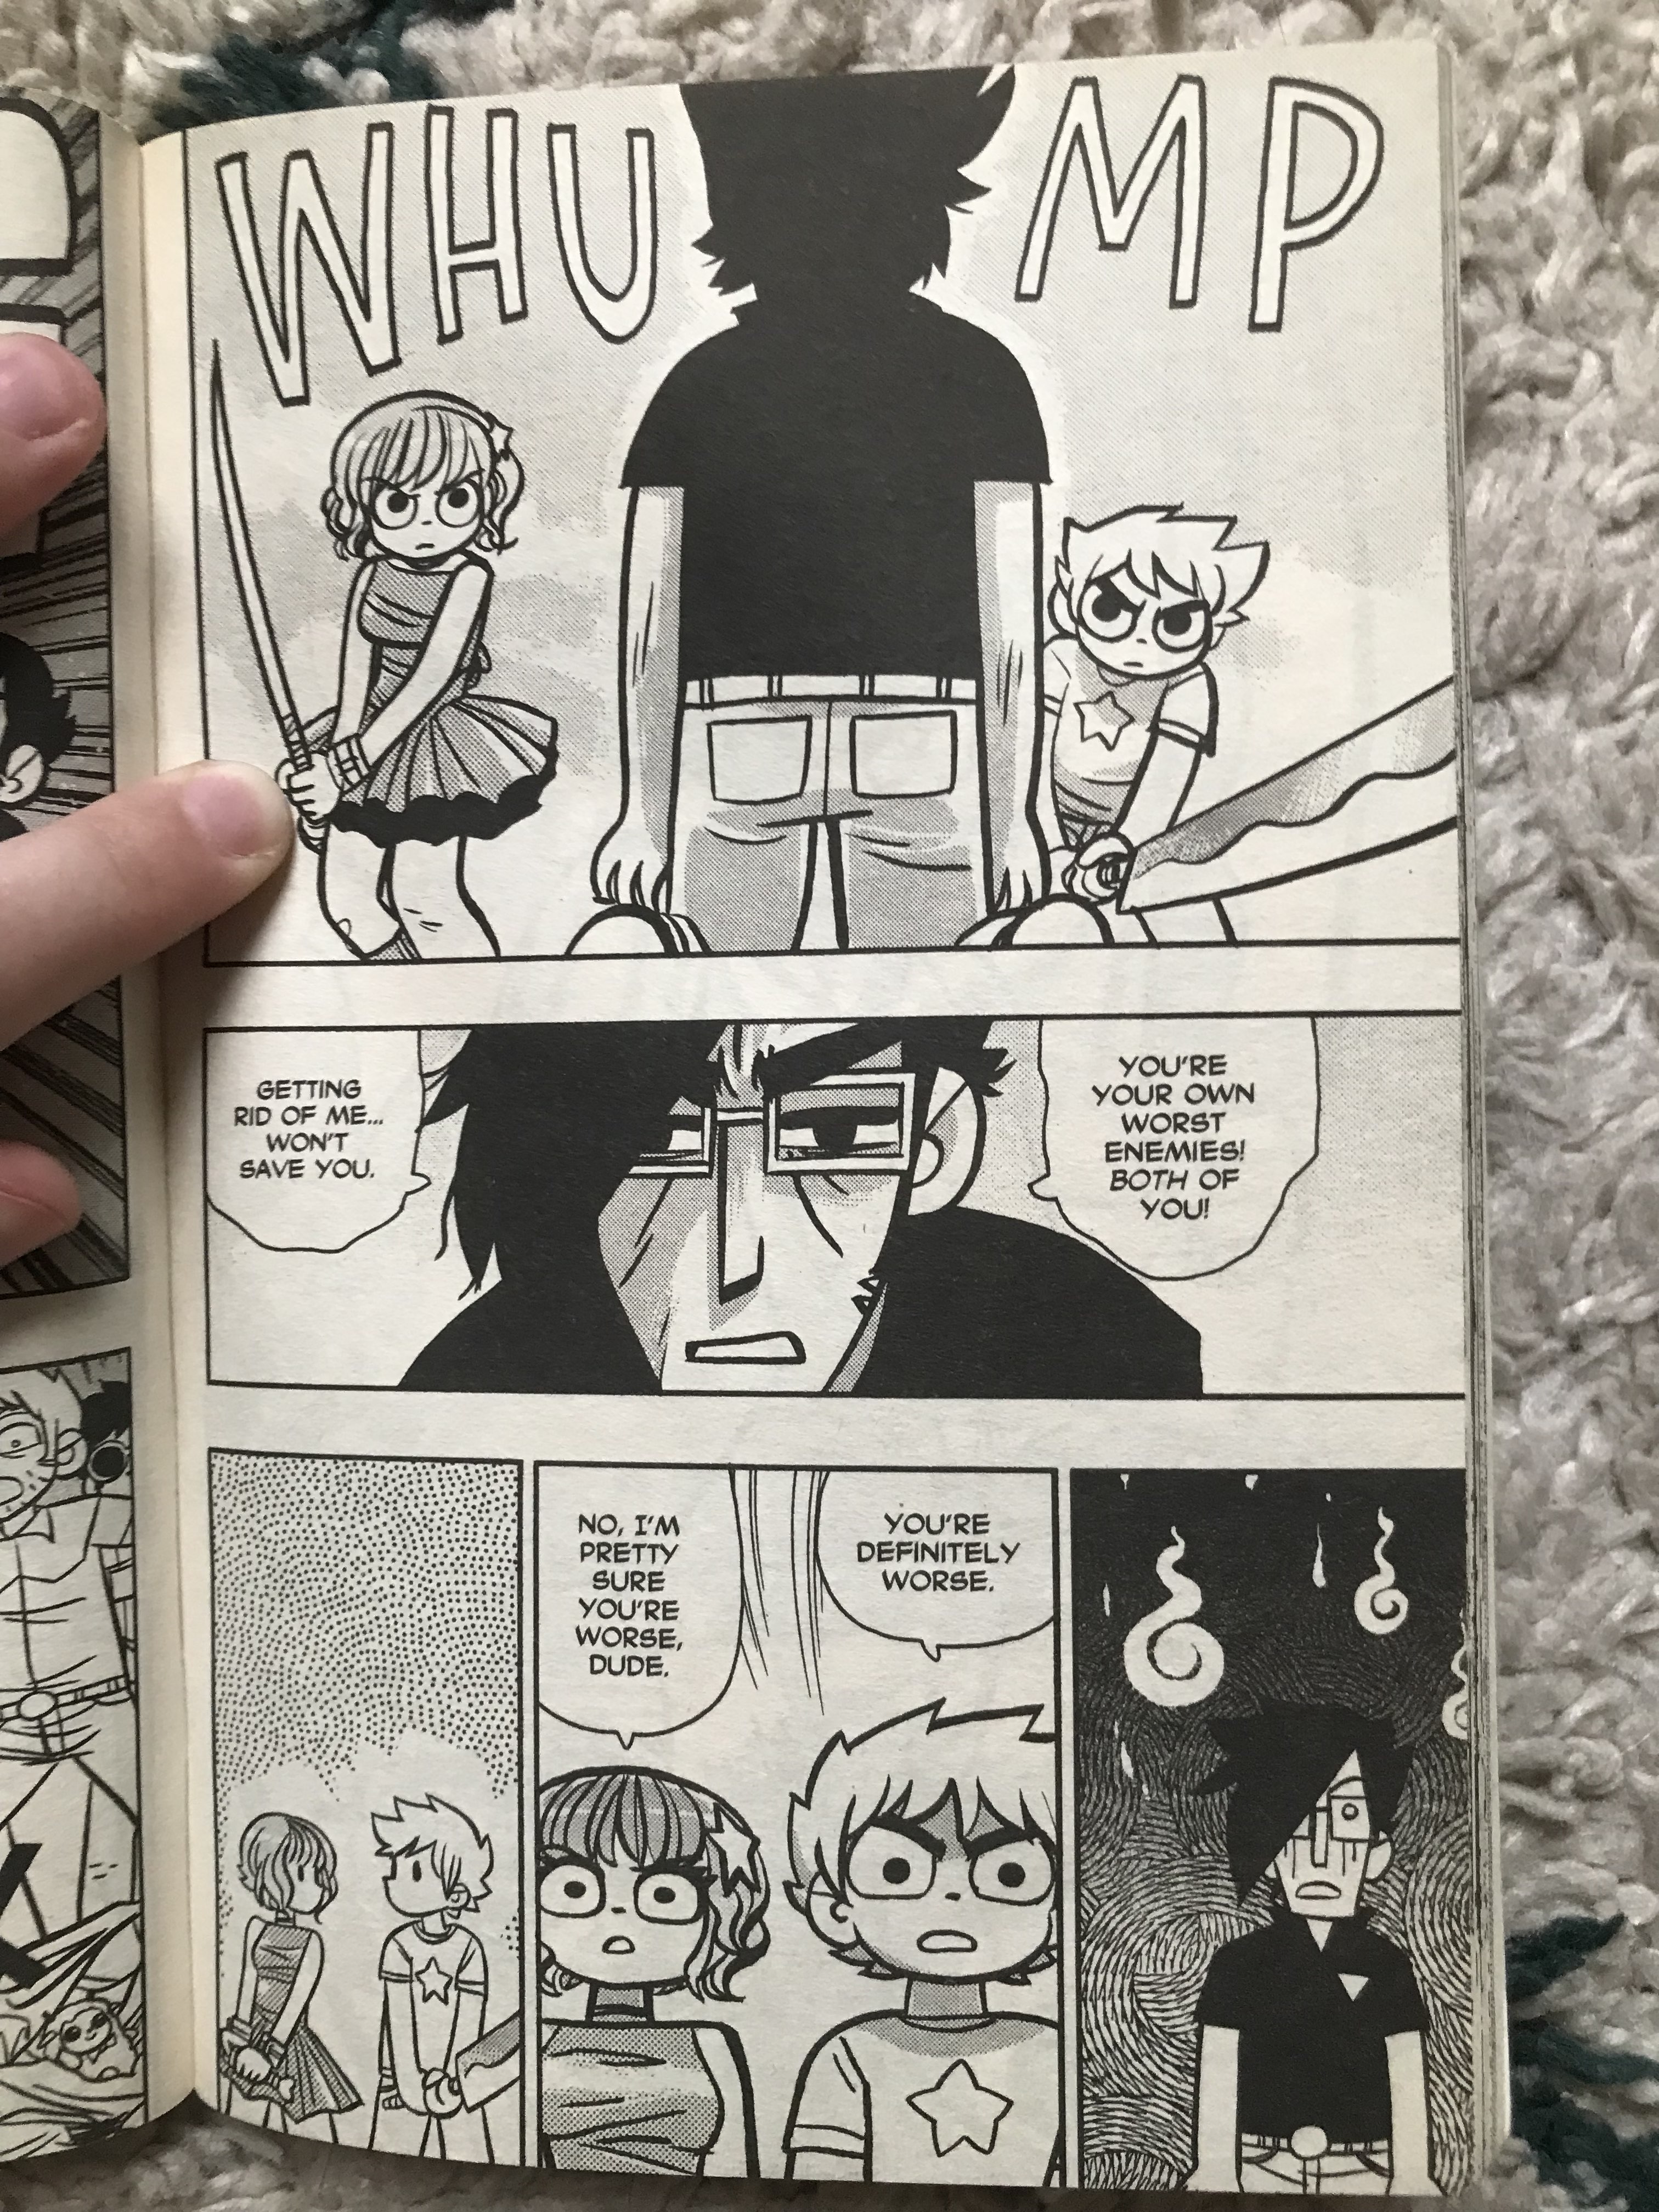 A photo of a single black and white page from Scott Pilgrim, showing Scott and Ramona facing down Gideon with swords. Gideon says that Scott and Ramona are each others' worst enemies, but Scott and Ramona agree he's definitely worse. 